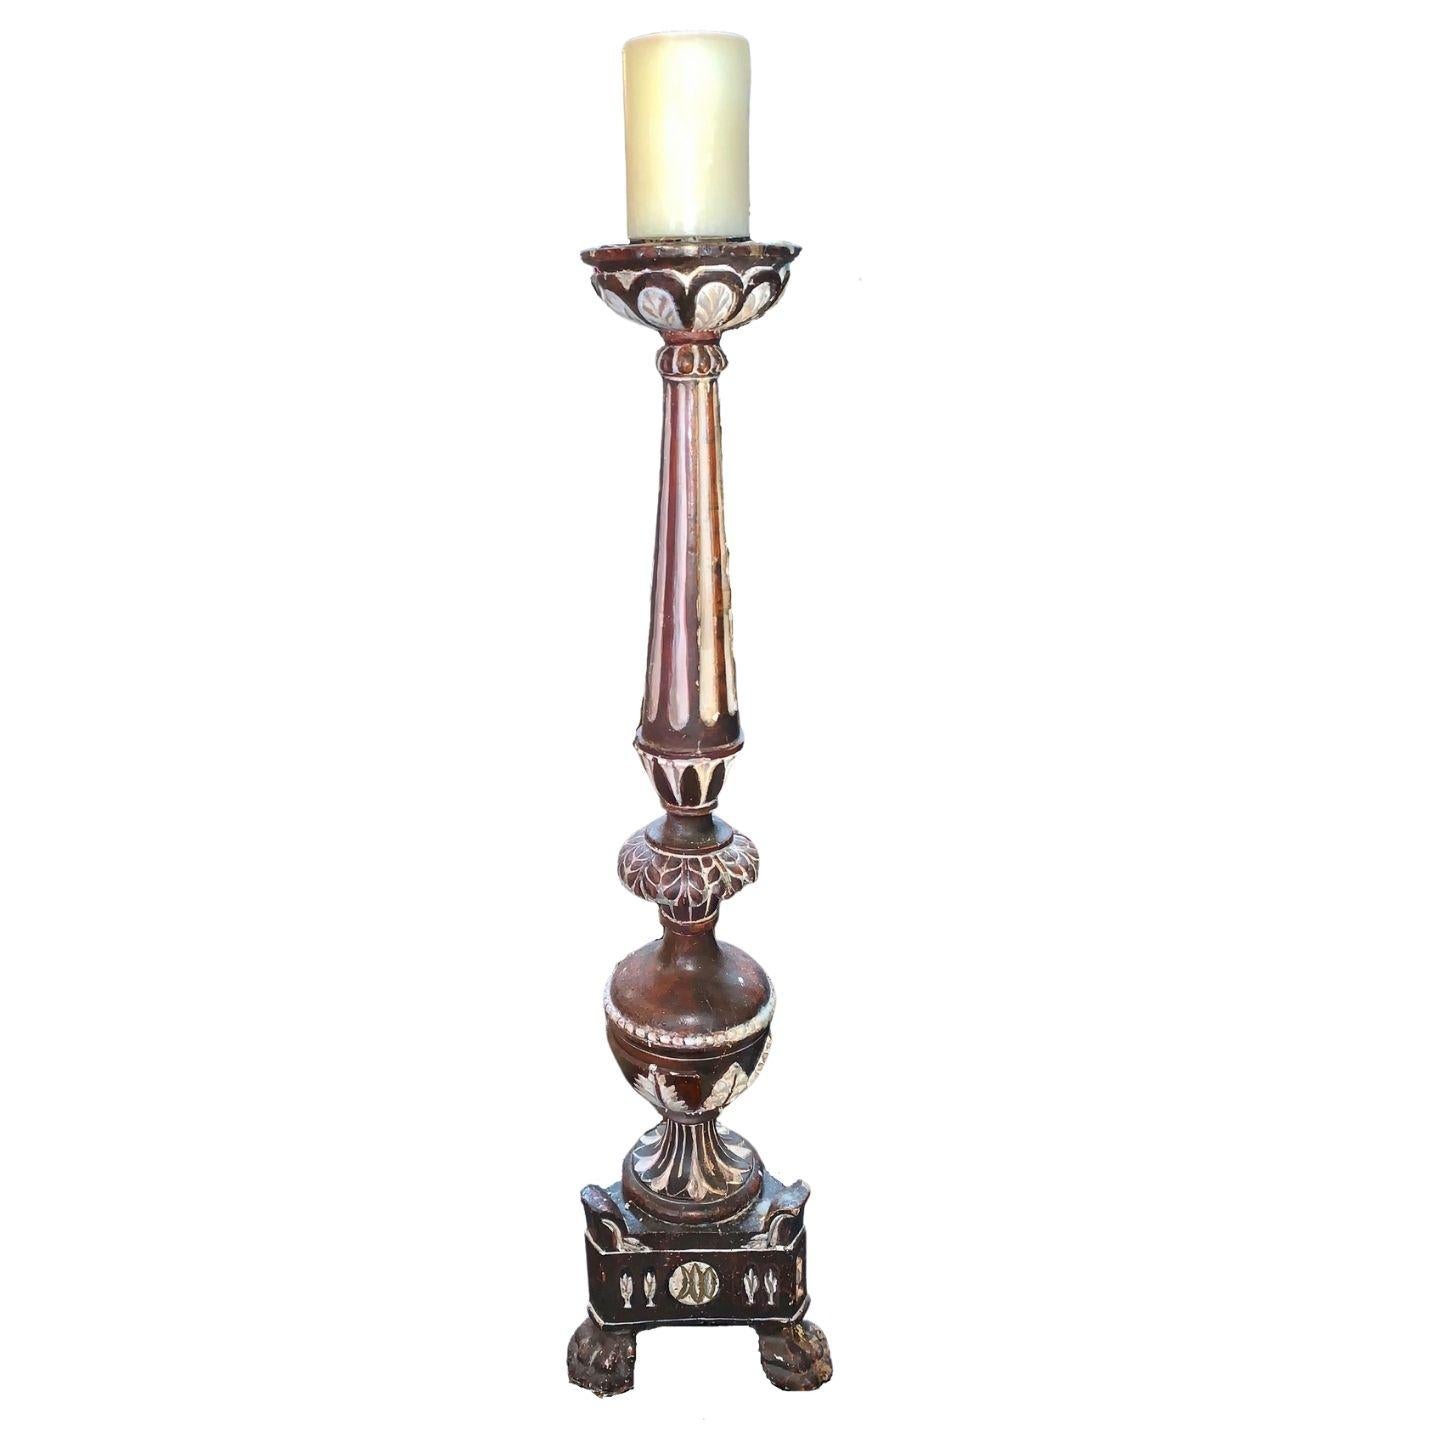 19th century large candlestick with engravings in the wood

(not sold with candle).